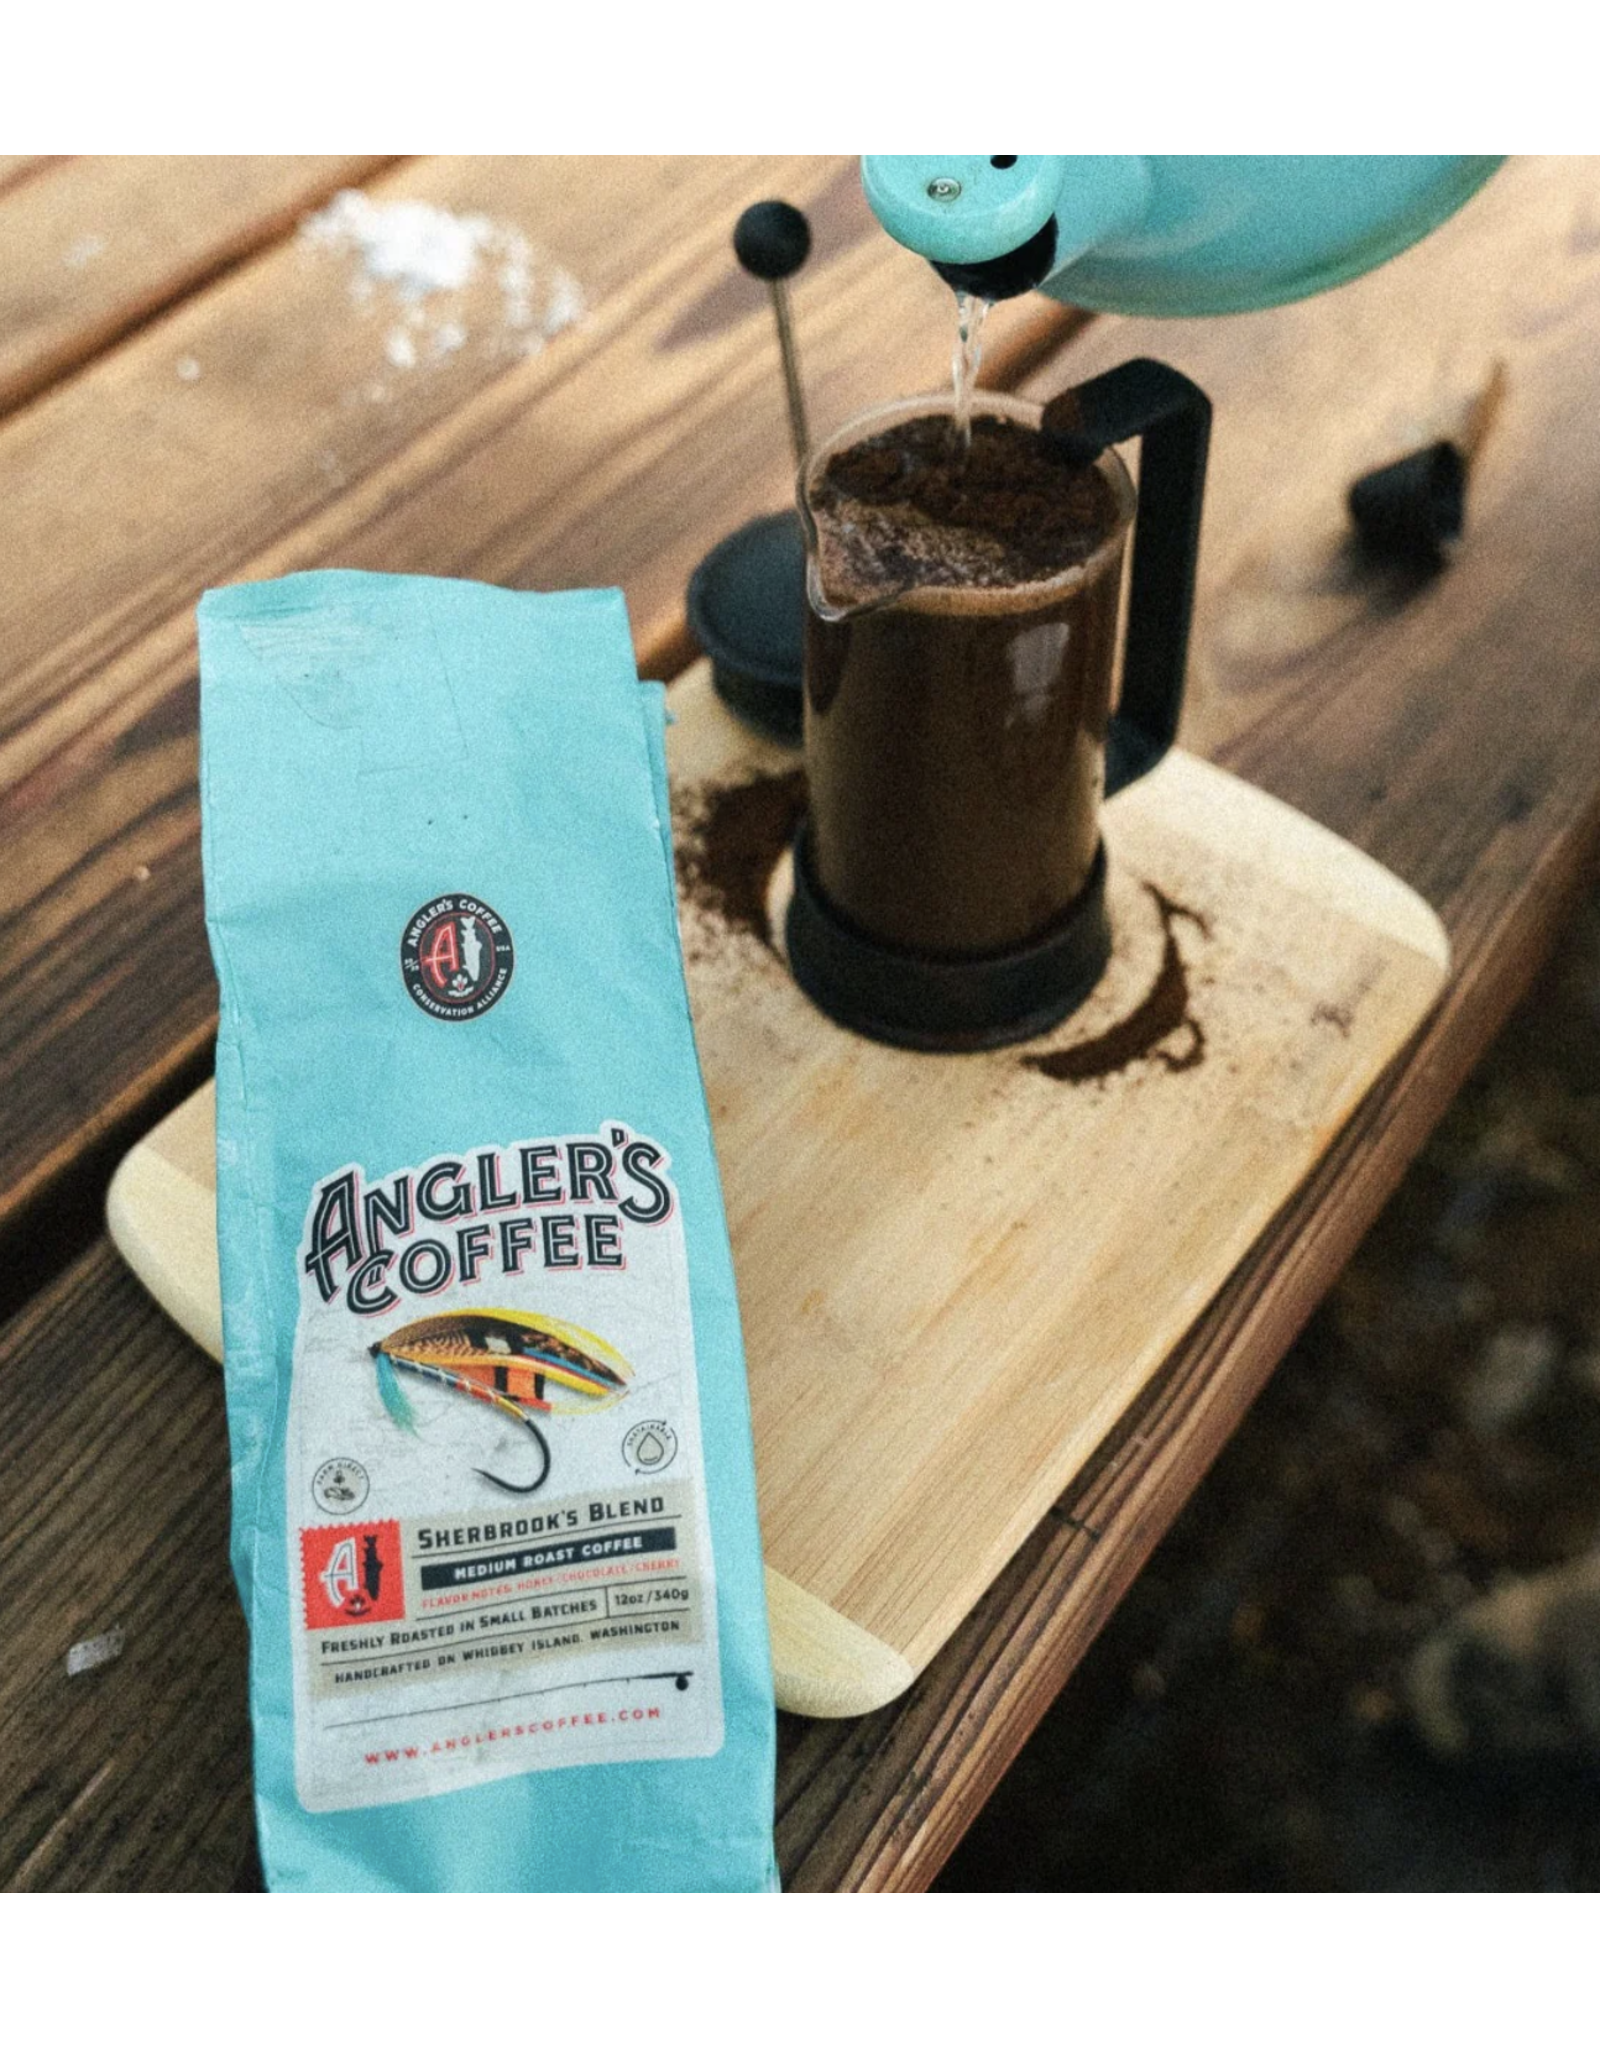 Angler's Coffee Sherbrook's Blend